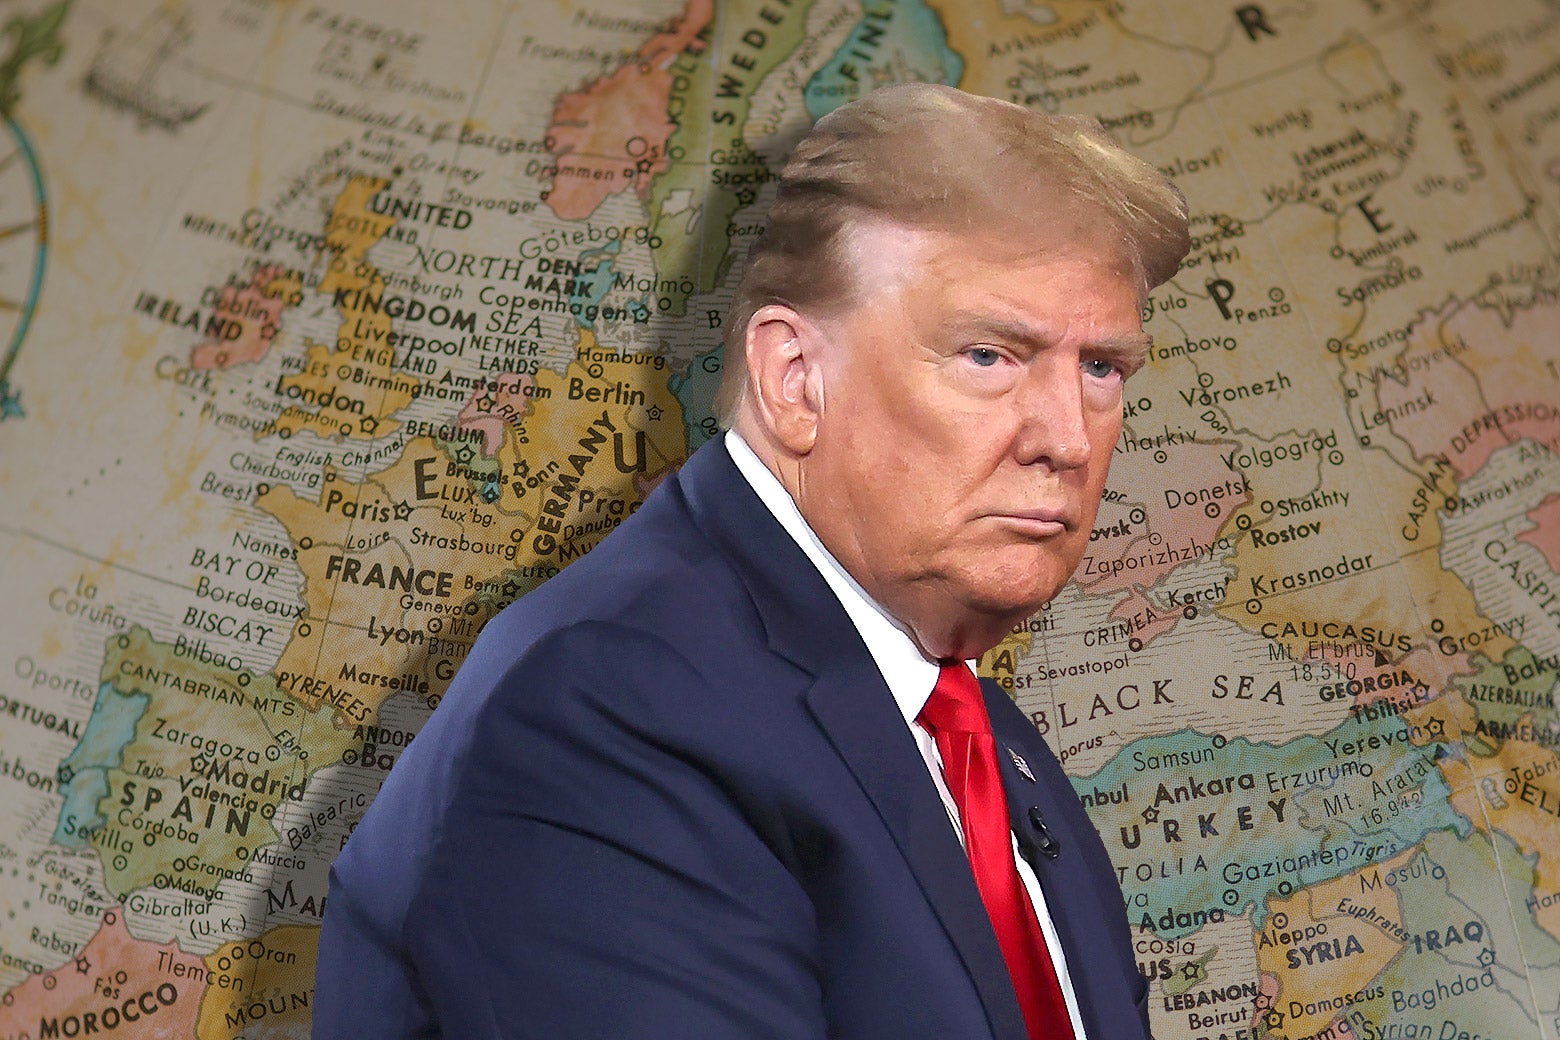 Donald Trump superimposed on a map of Europe.